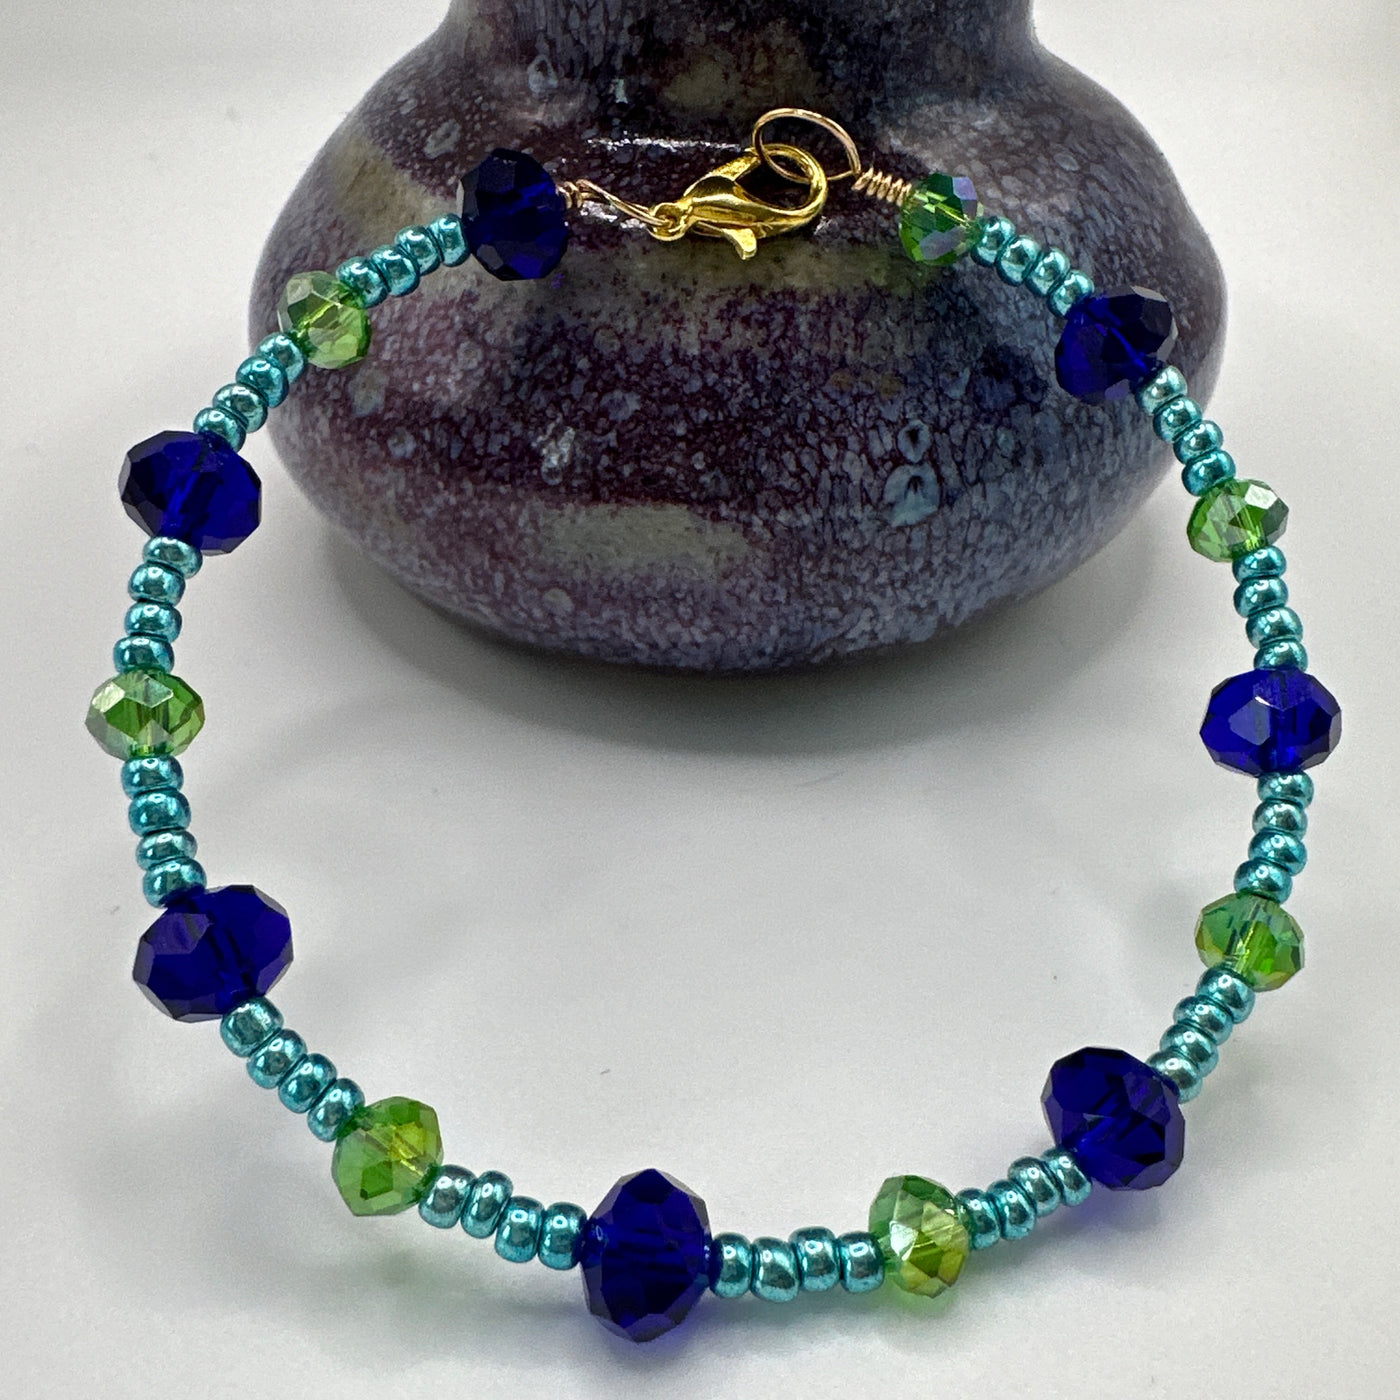 Rigid bracelet with blue and green faceted glass and metallic blue pearls